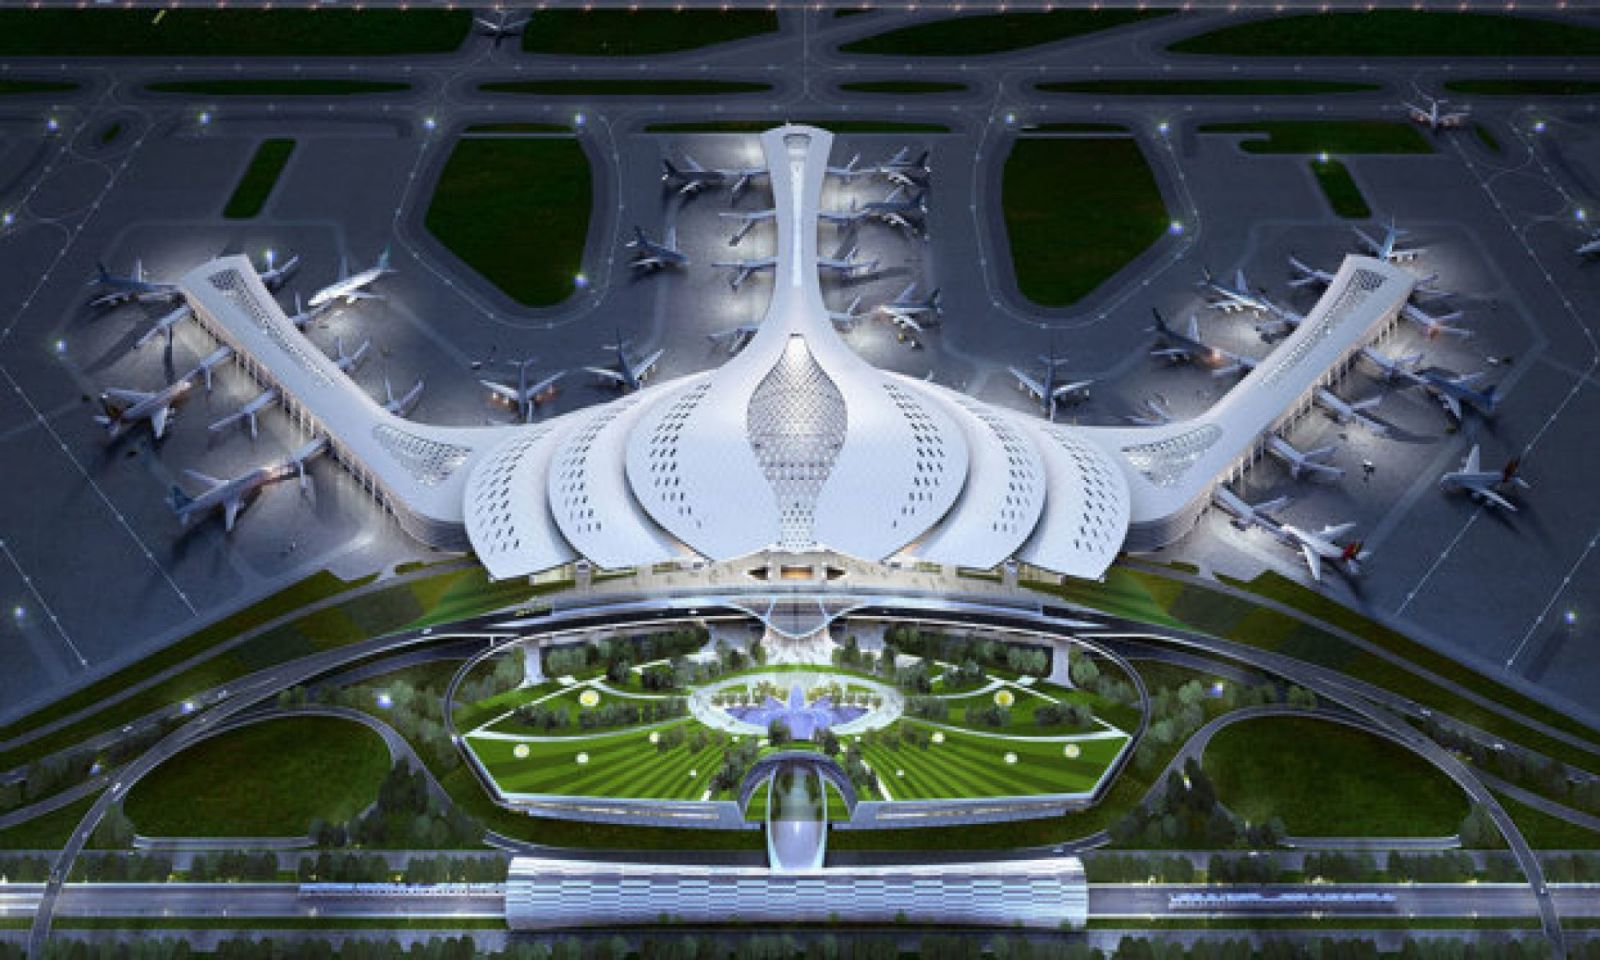 The design of Long Thanh international airport. (Source: ACV)